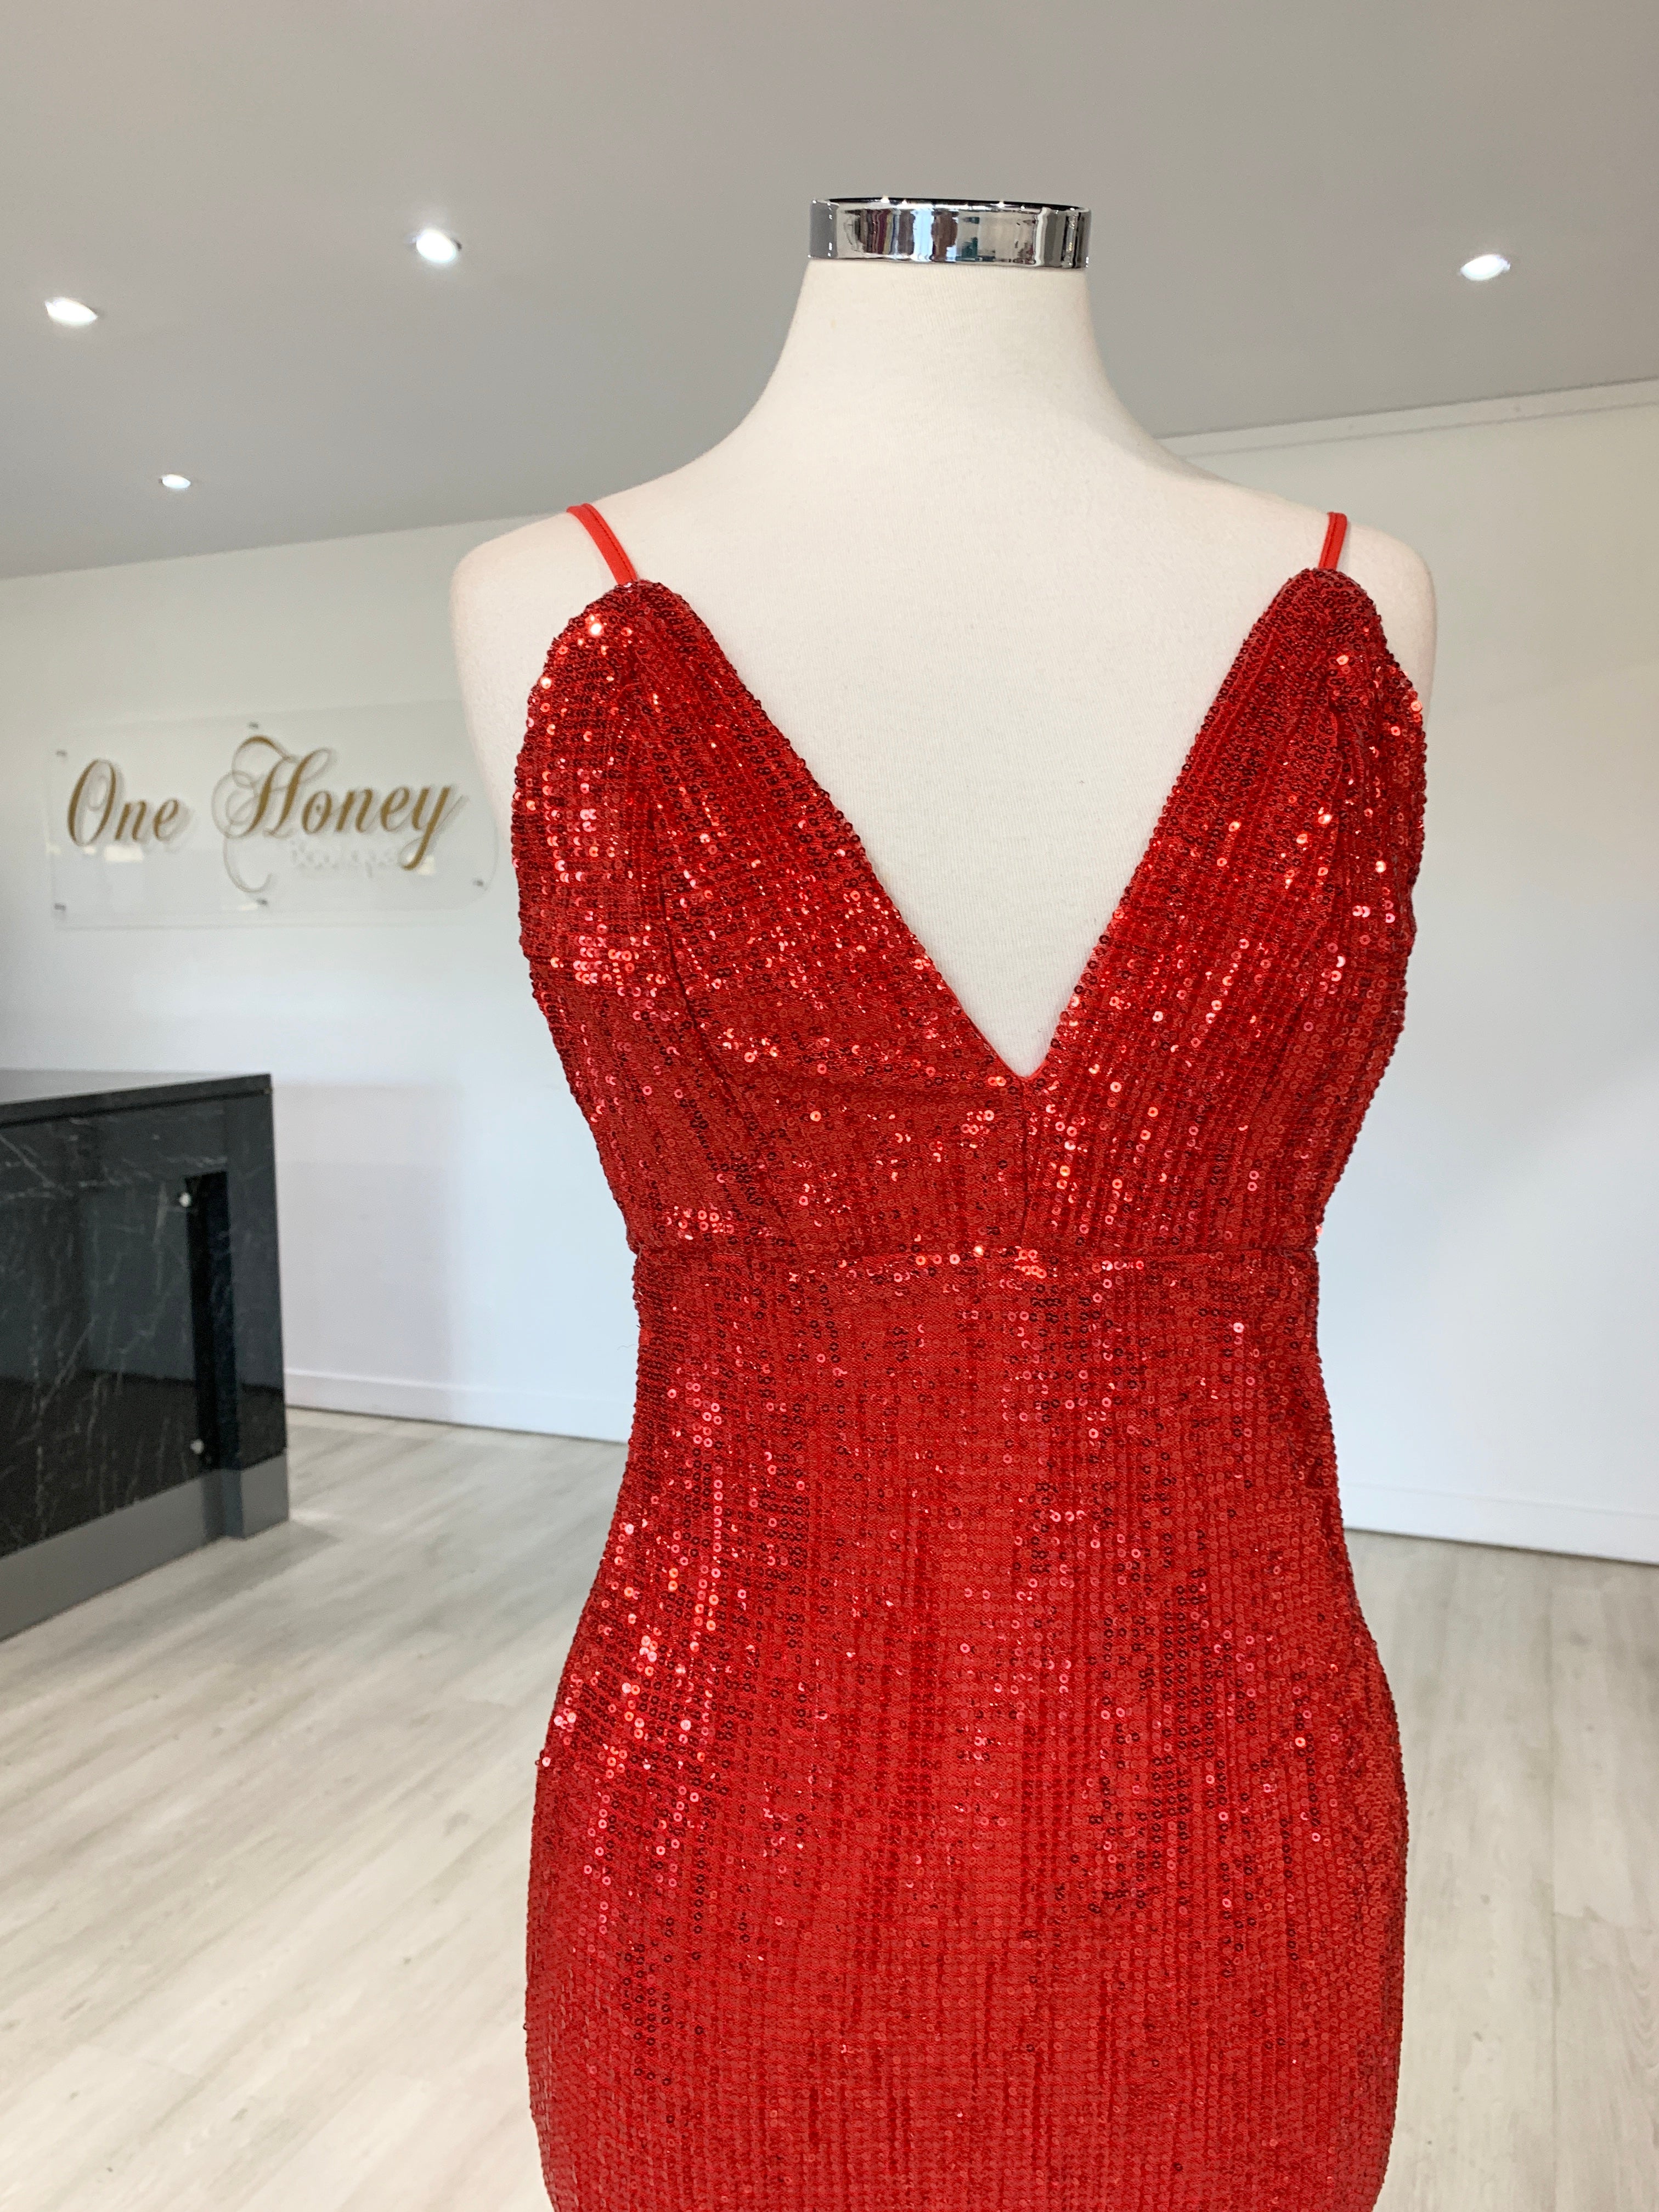 Honey Couture ROSALIE Red Low Back Sequin Formal Gown Dress {vendor} AfterPay Humm ZipPay LayBuy Sezzle